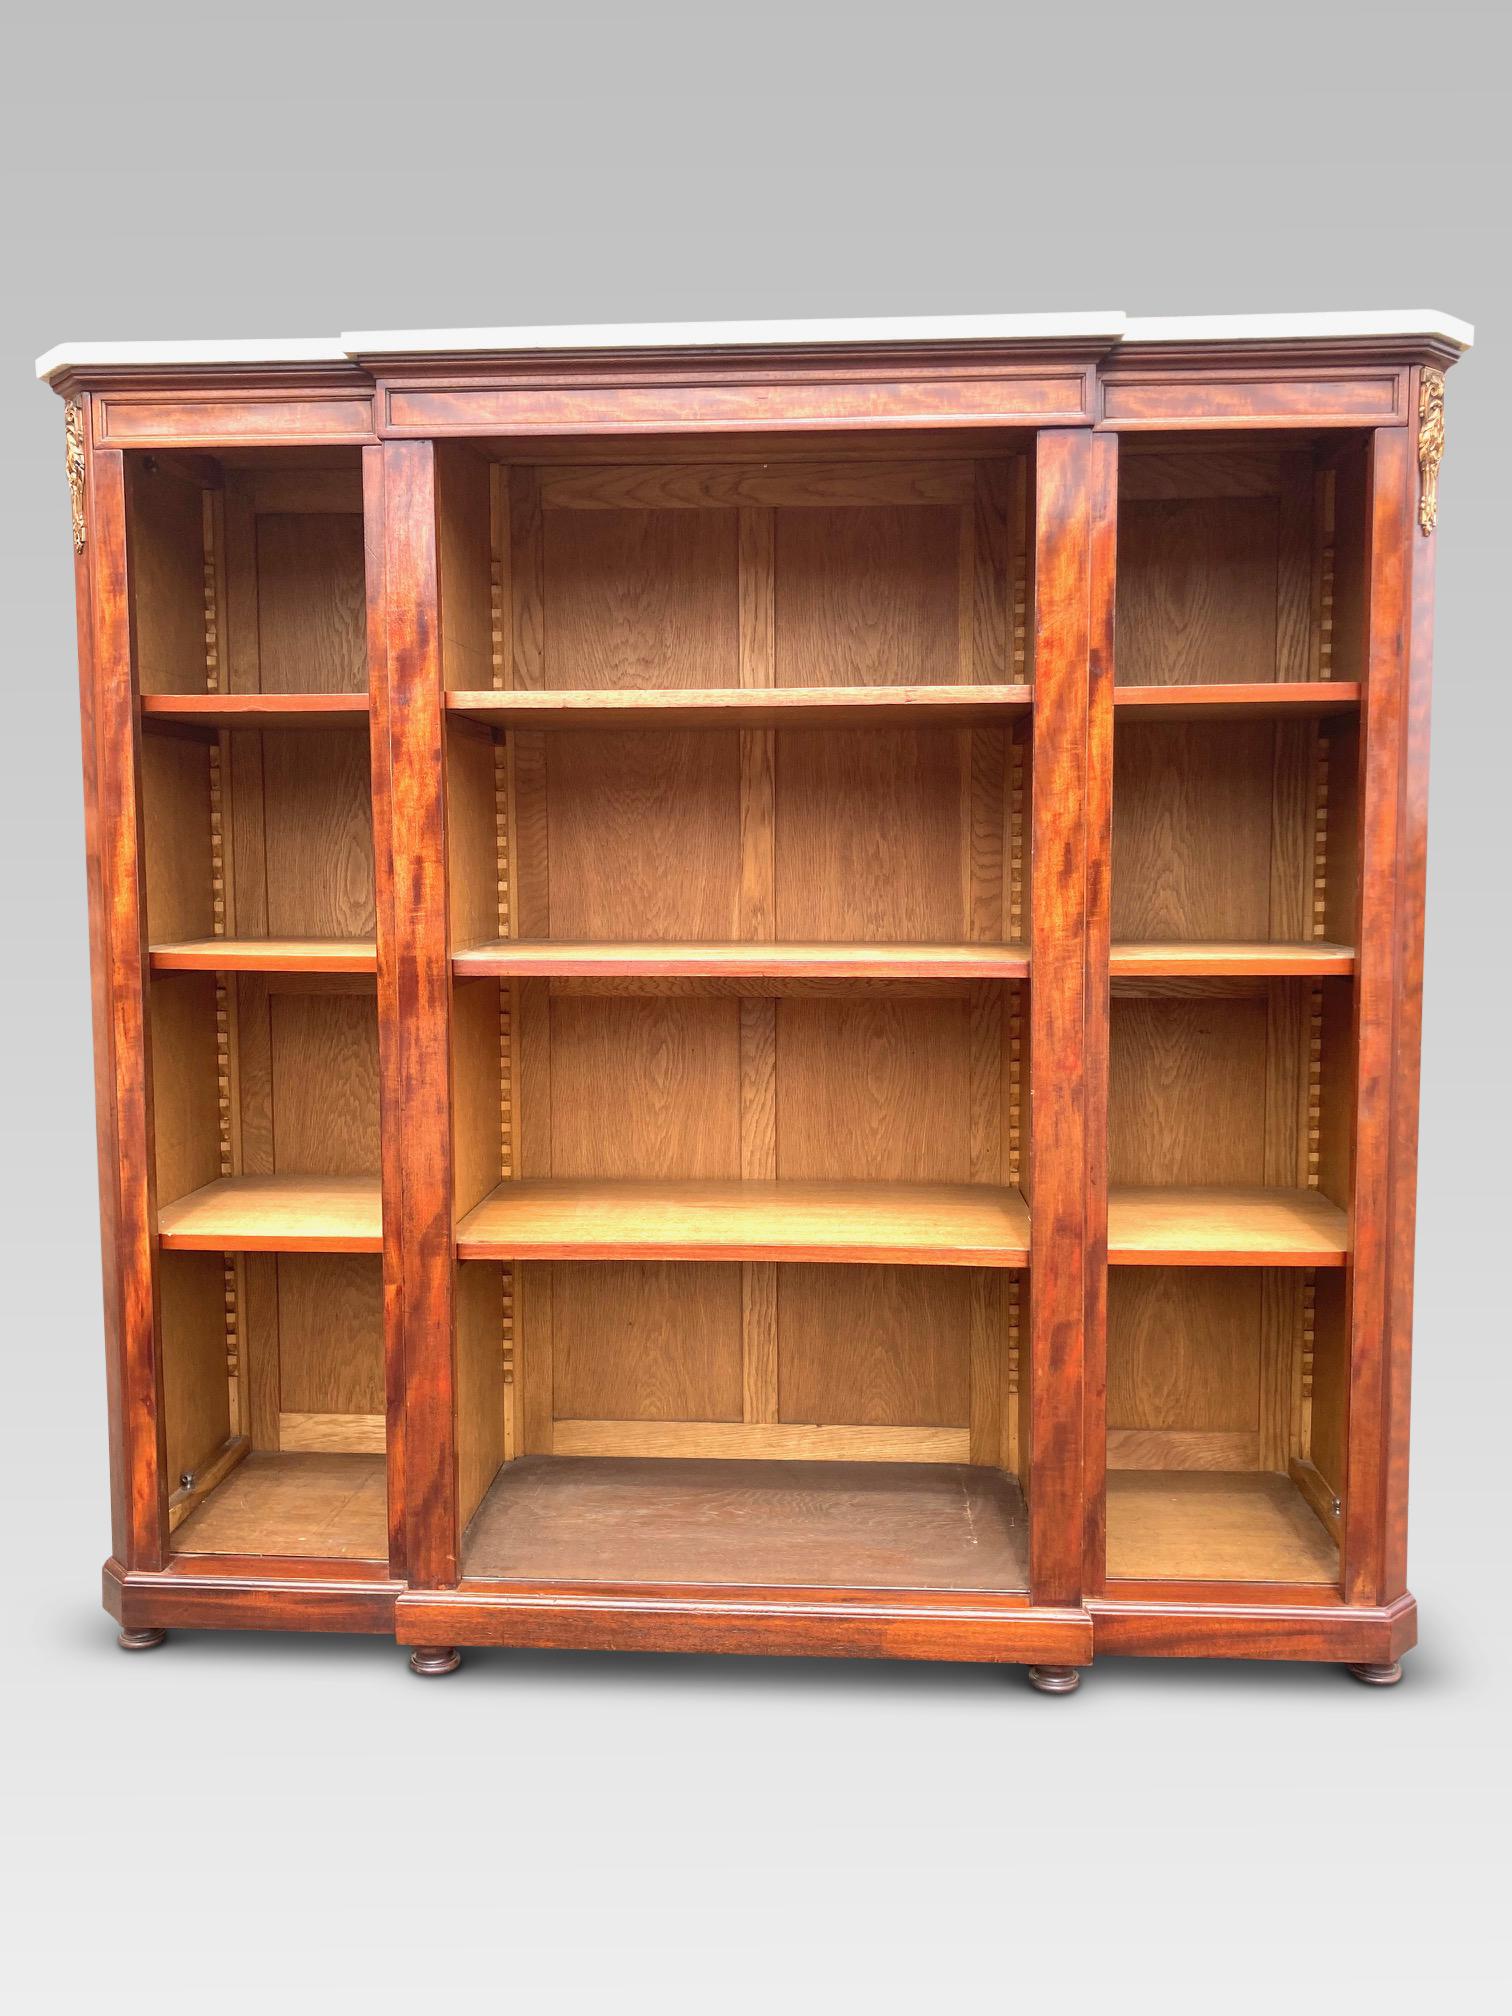 Fine quality mahogany bookcase, French, circa 1880
This bookcase is in excellent condition. The mahogany is well polished and retains a good color and patina. The marble top is in original undamaged condition with no chips or repairs. There are 9